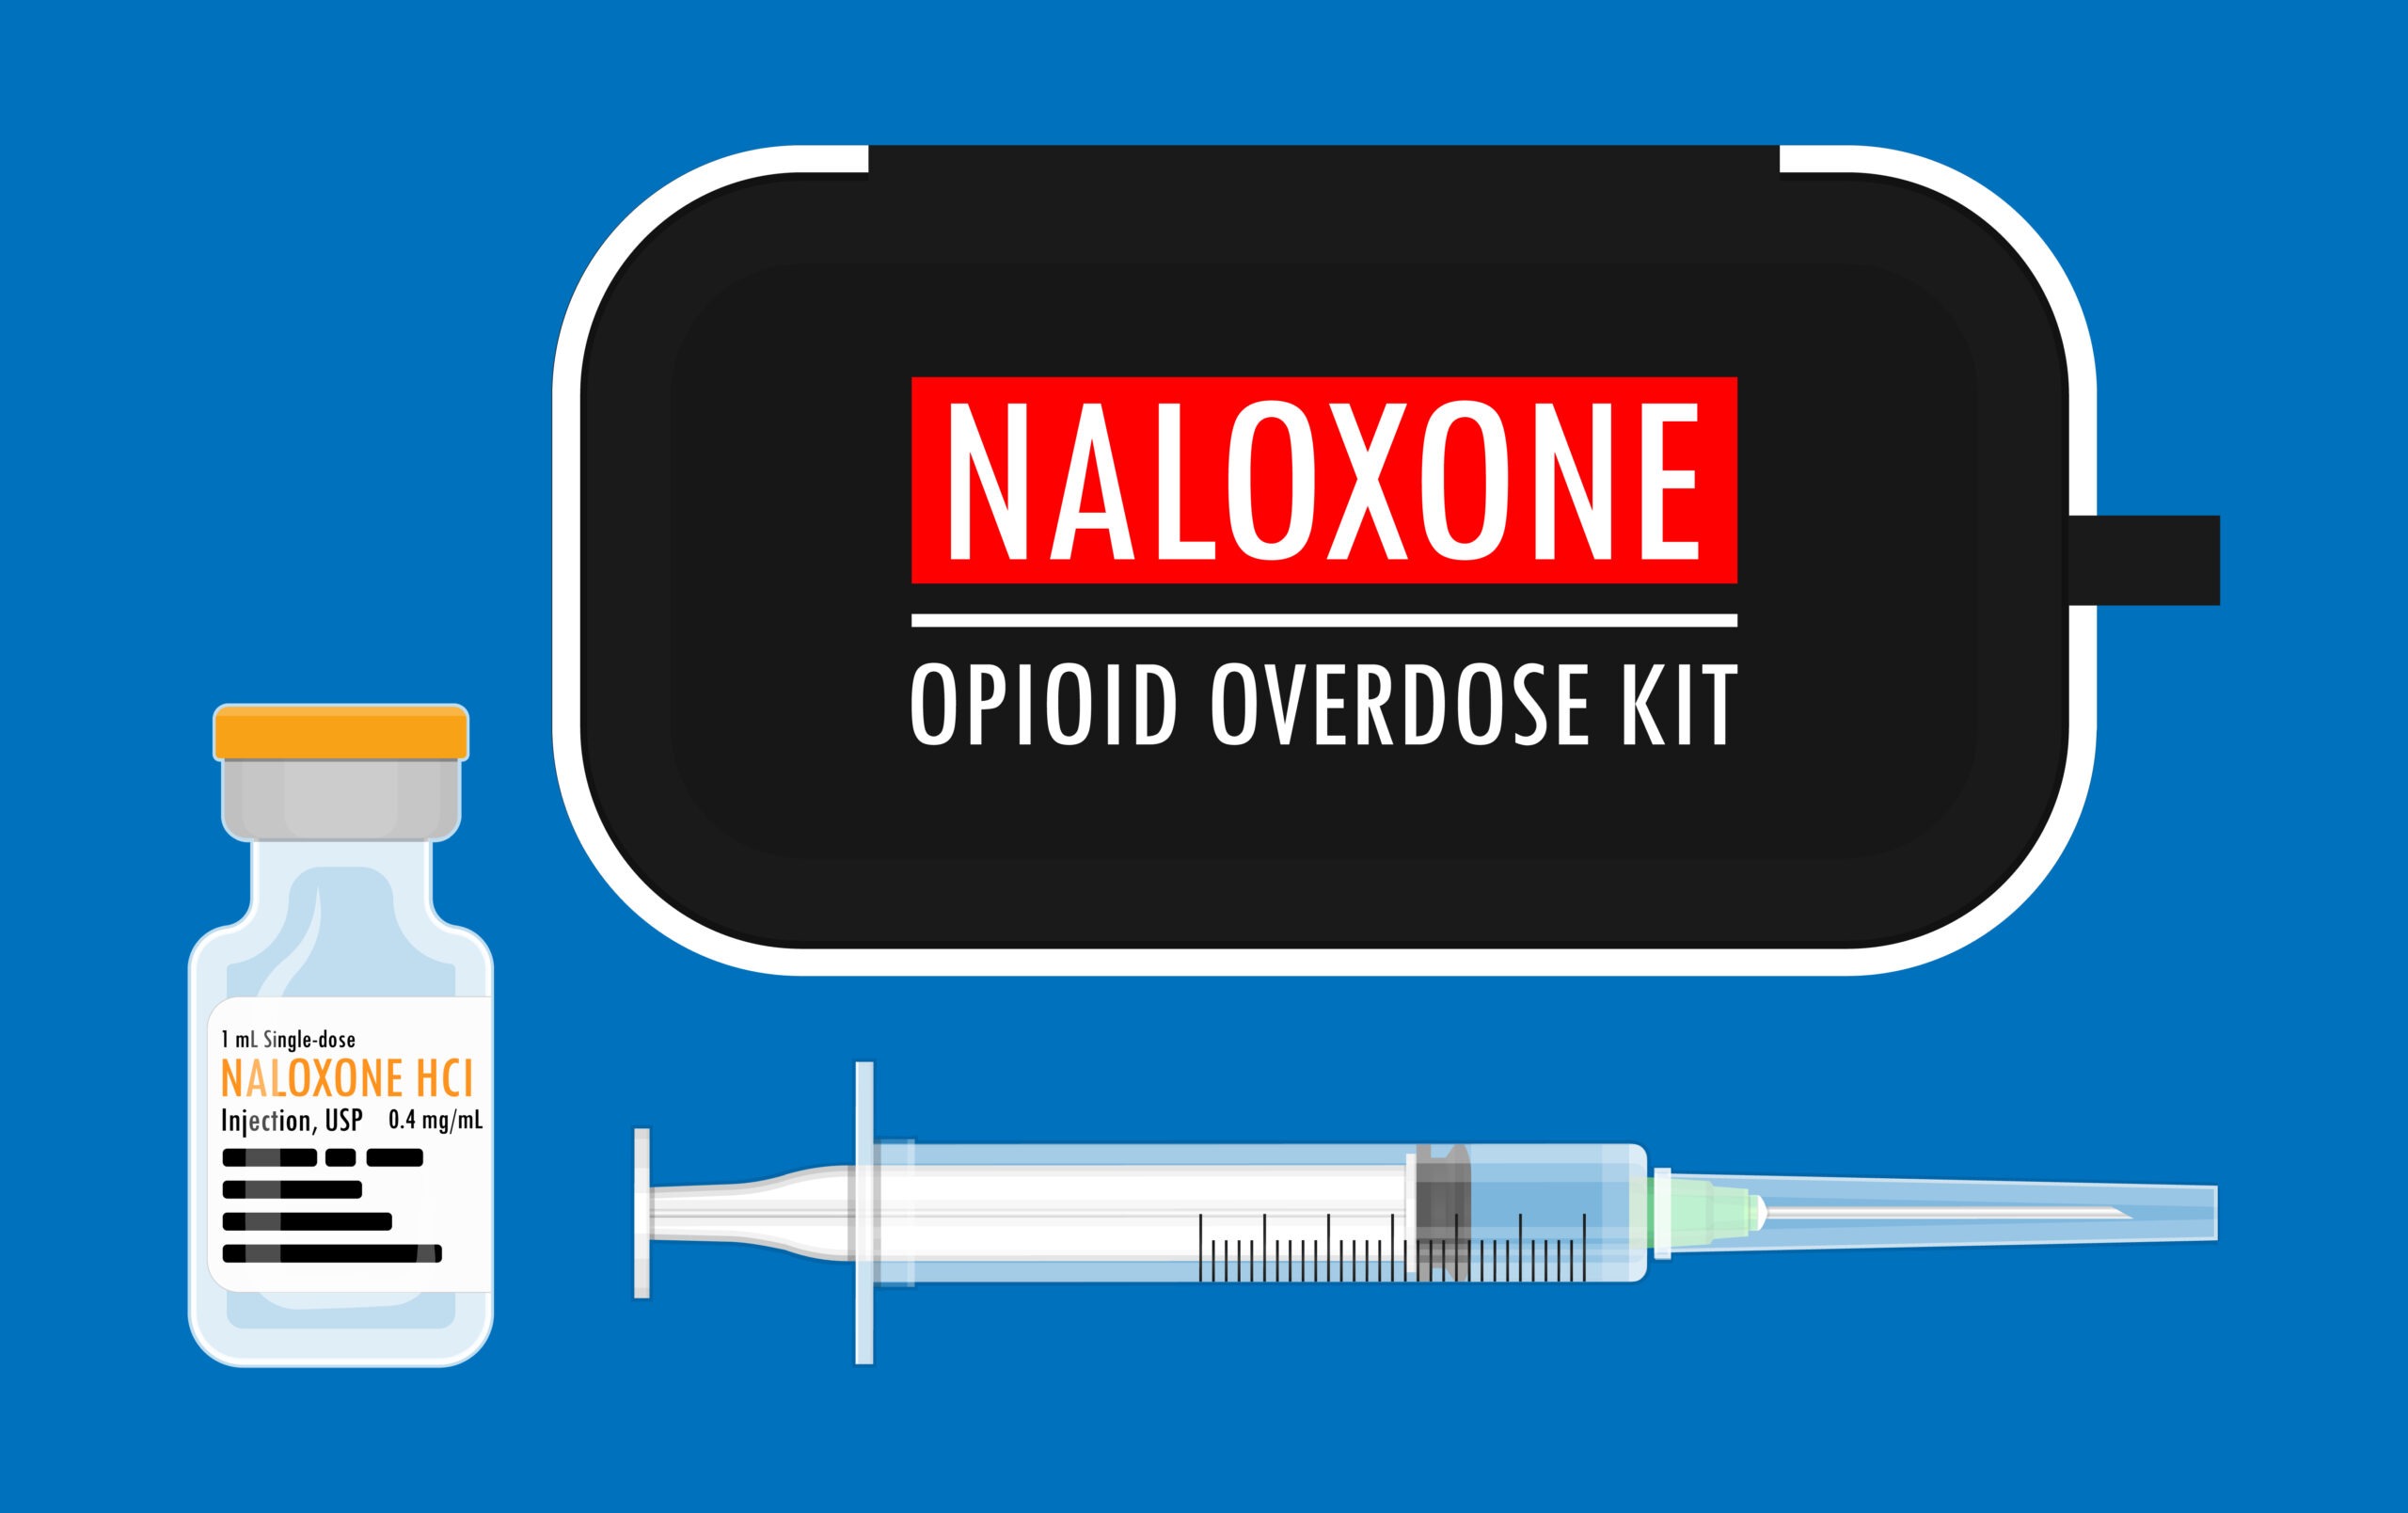 what happens during an opioid overdose